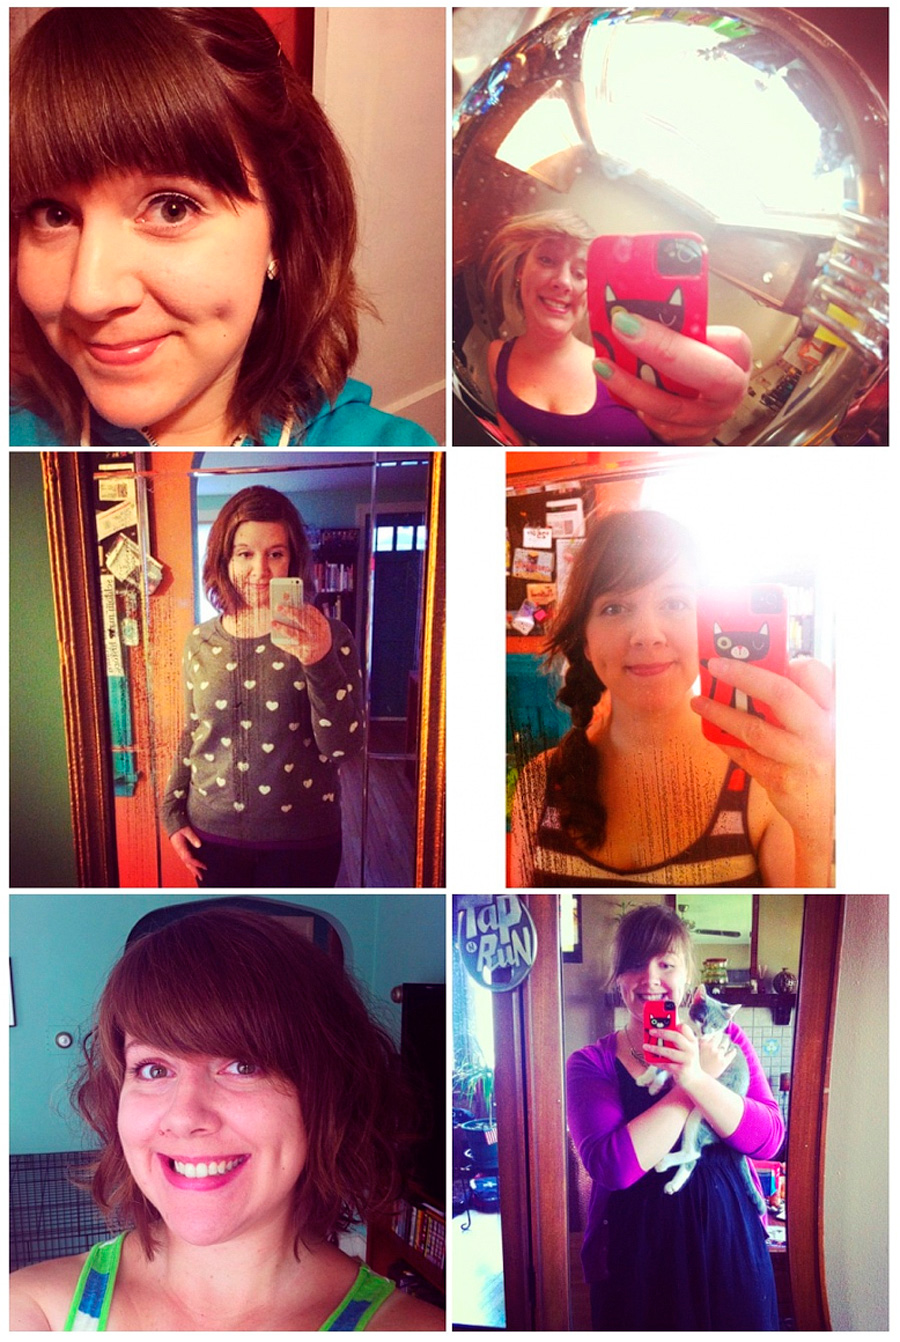 I took lots of SELFIES omg. This might seem weird, but 2013 was a big year for me in terms of getting my self-confidence back. I spent a long time not loving how I looked, but I either started loving it or stopped giving a fuck in 2013, which was awesome.